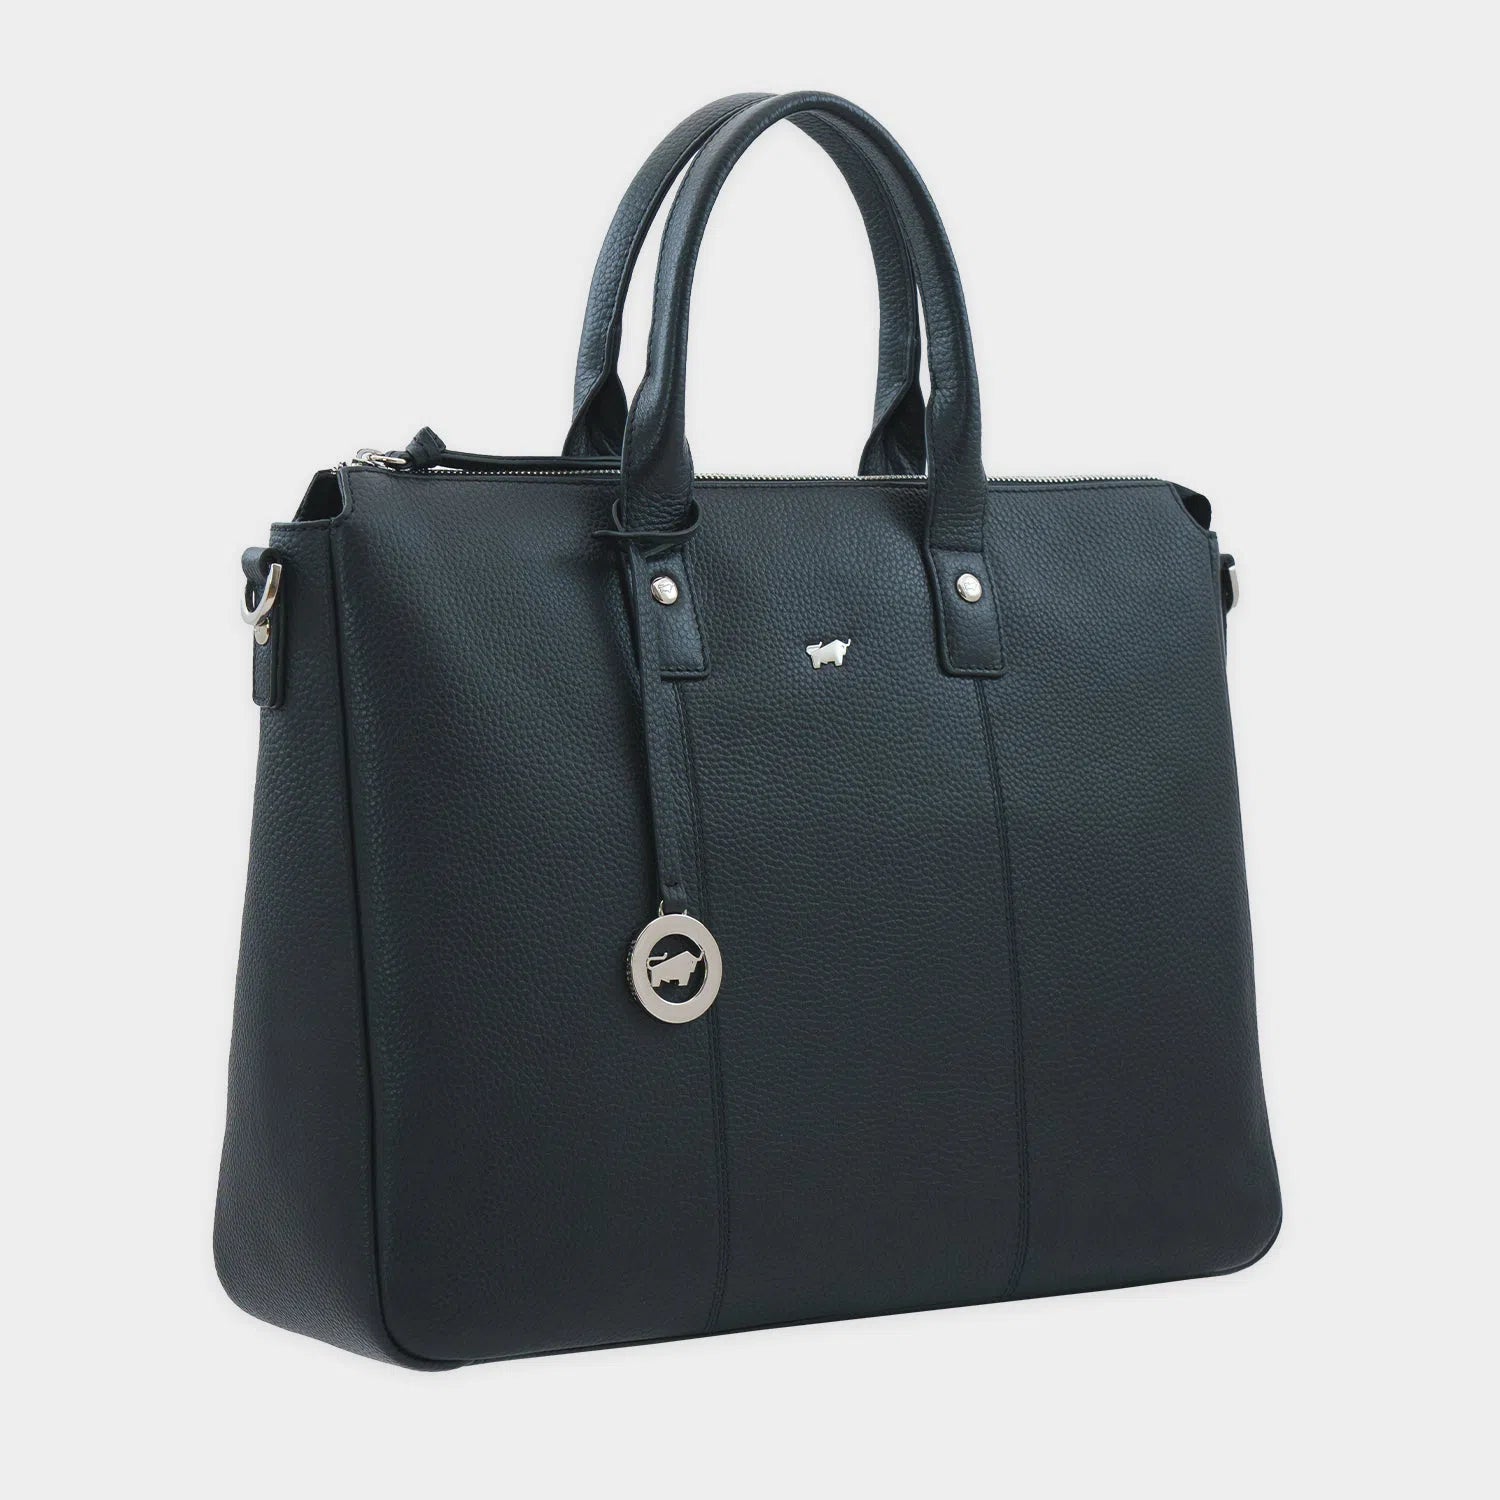 HANNA Business Tote schwarz hover